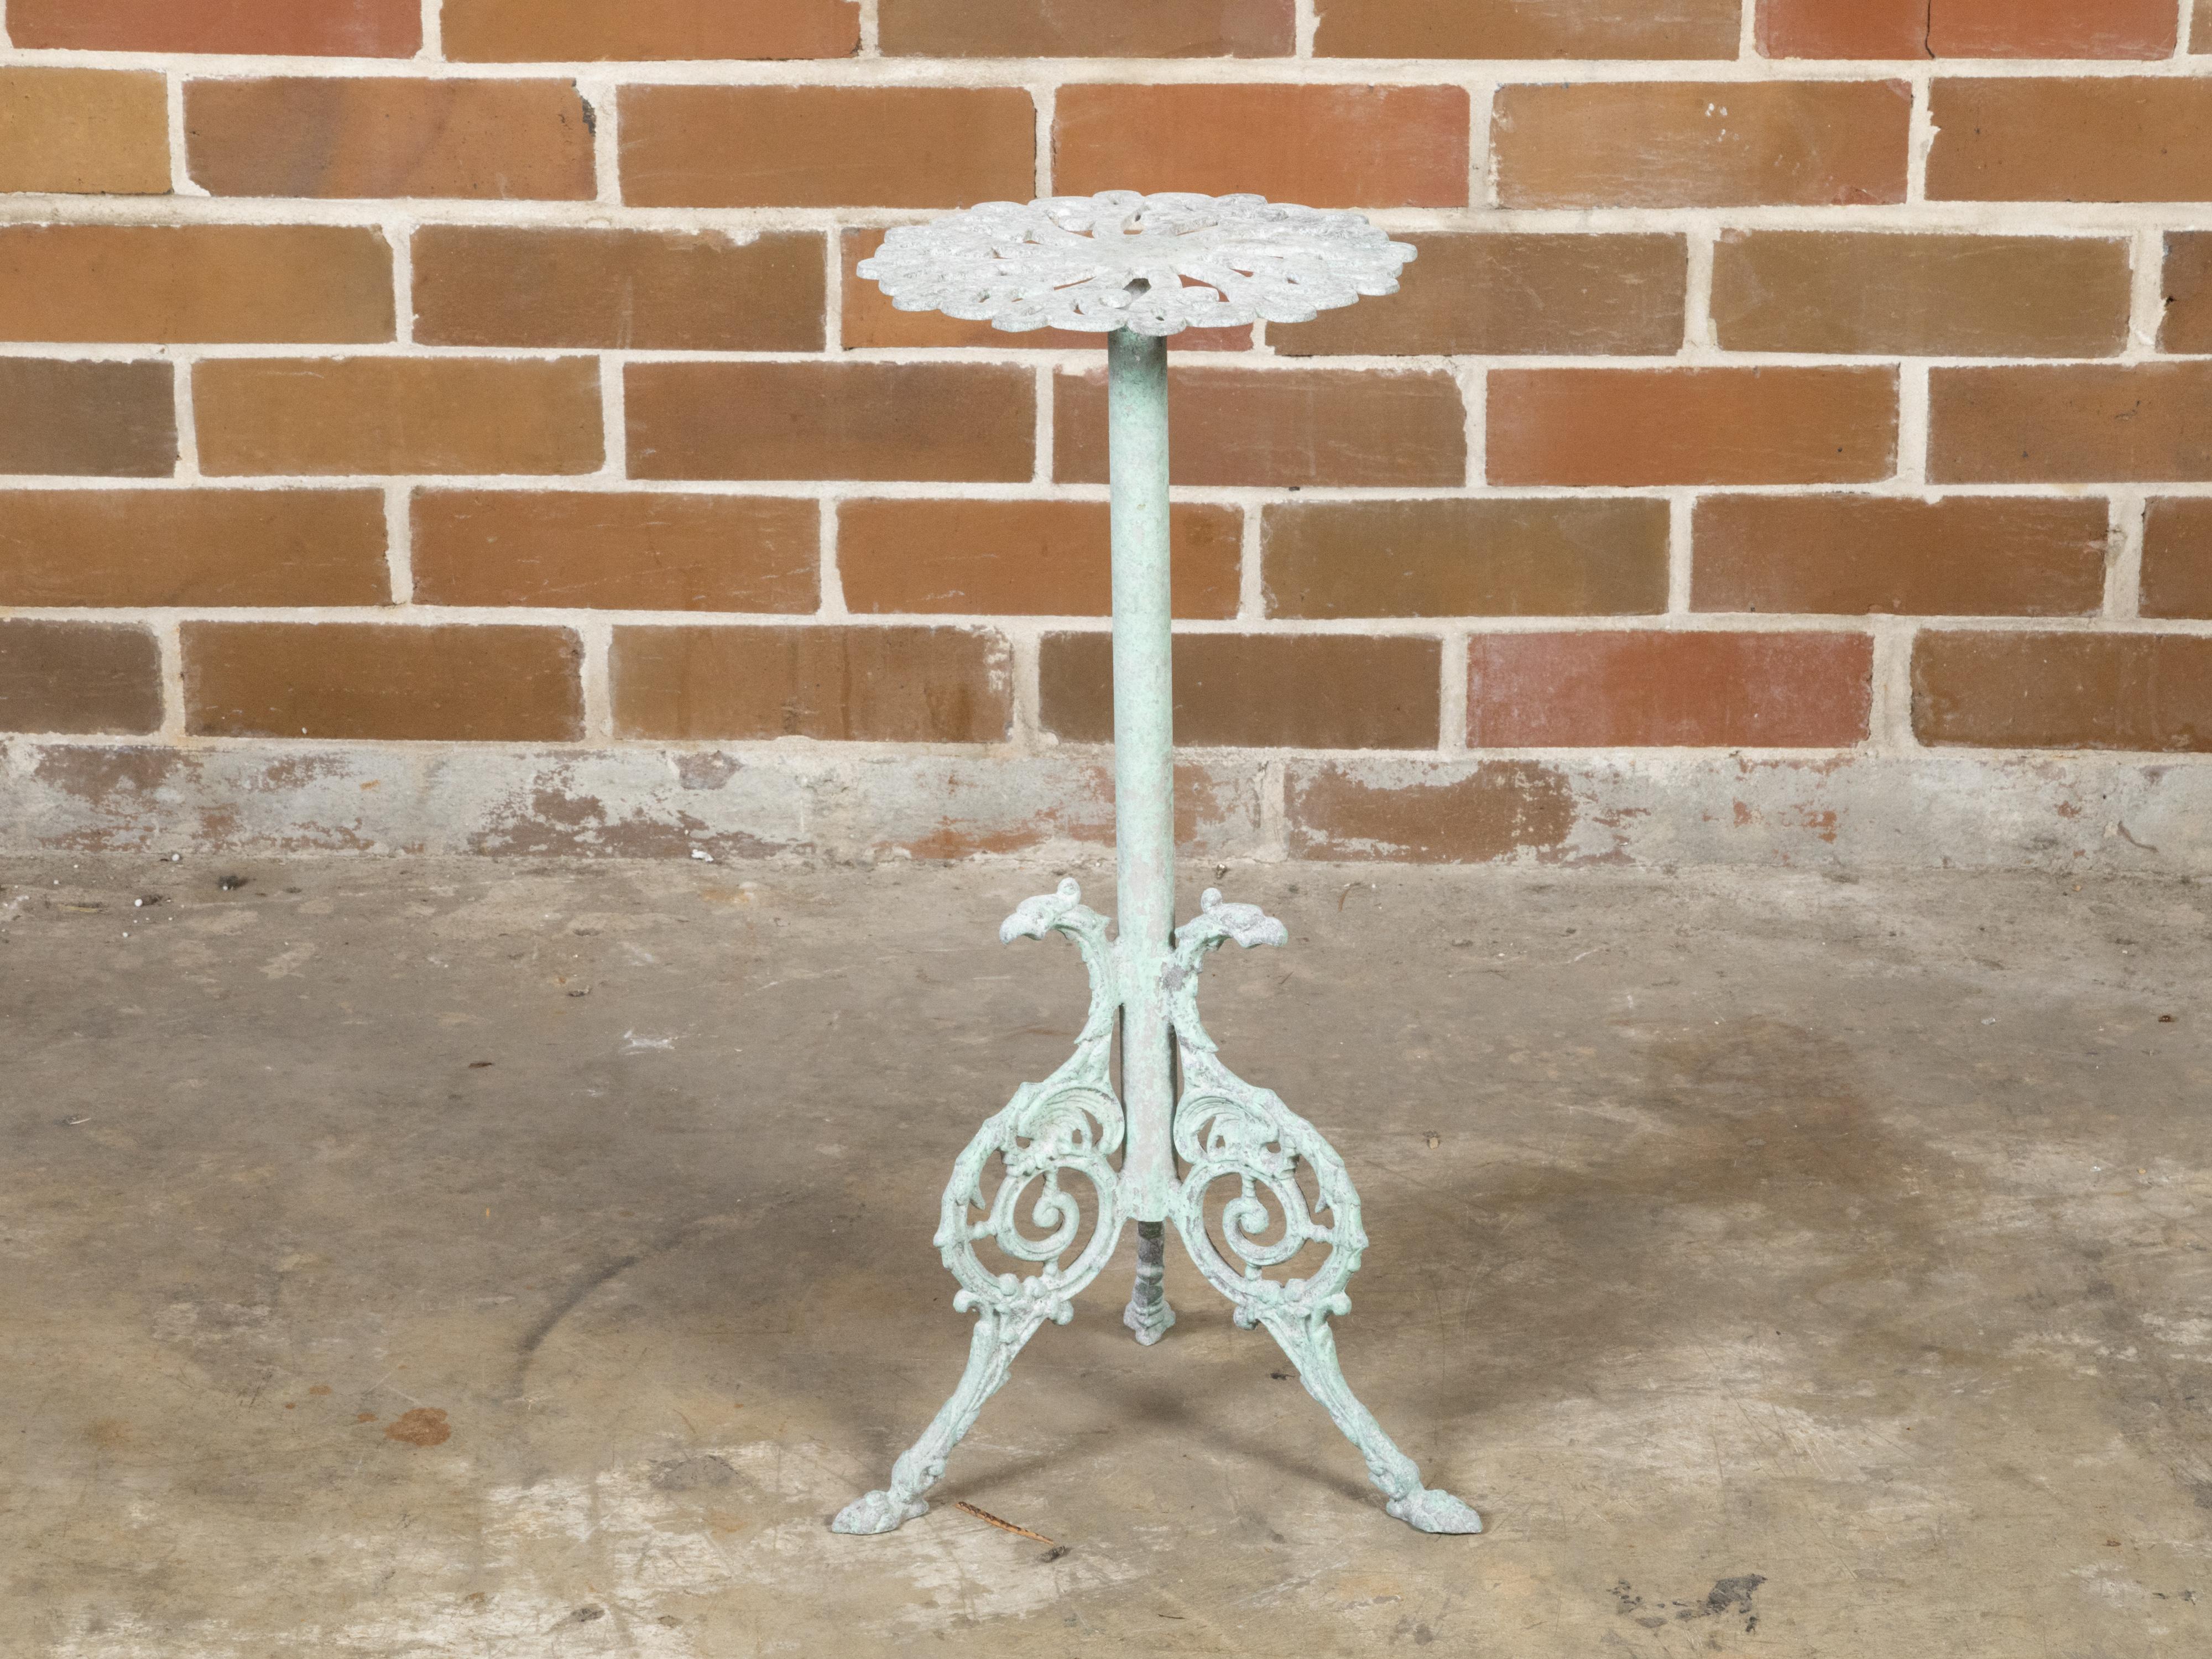 A small French iron garden pedestal side table from the early 20th century, with soft green painted finish, floral inspired top and tripod base on hoof feet. Created in France during the vibrant Roaring Twenties in the first quarter of the 20th